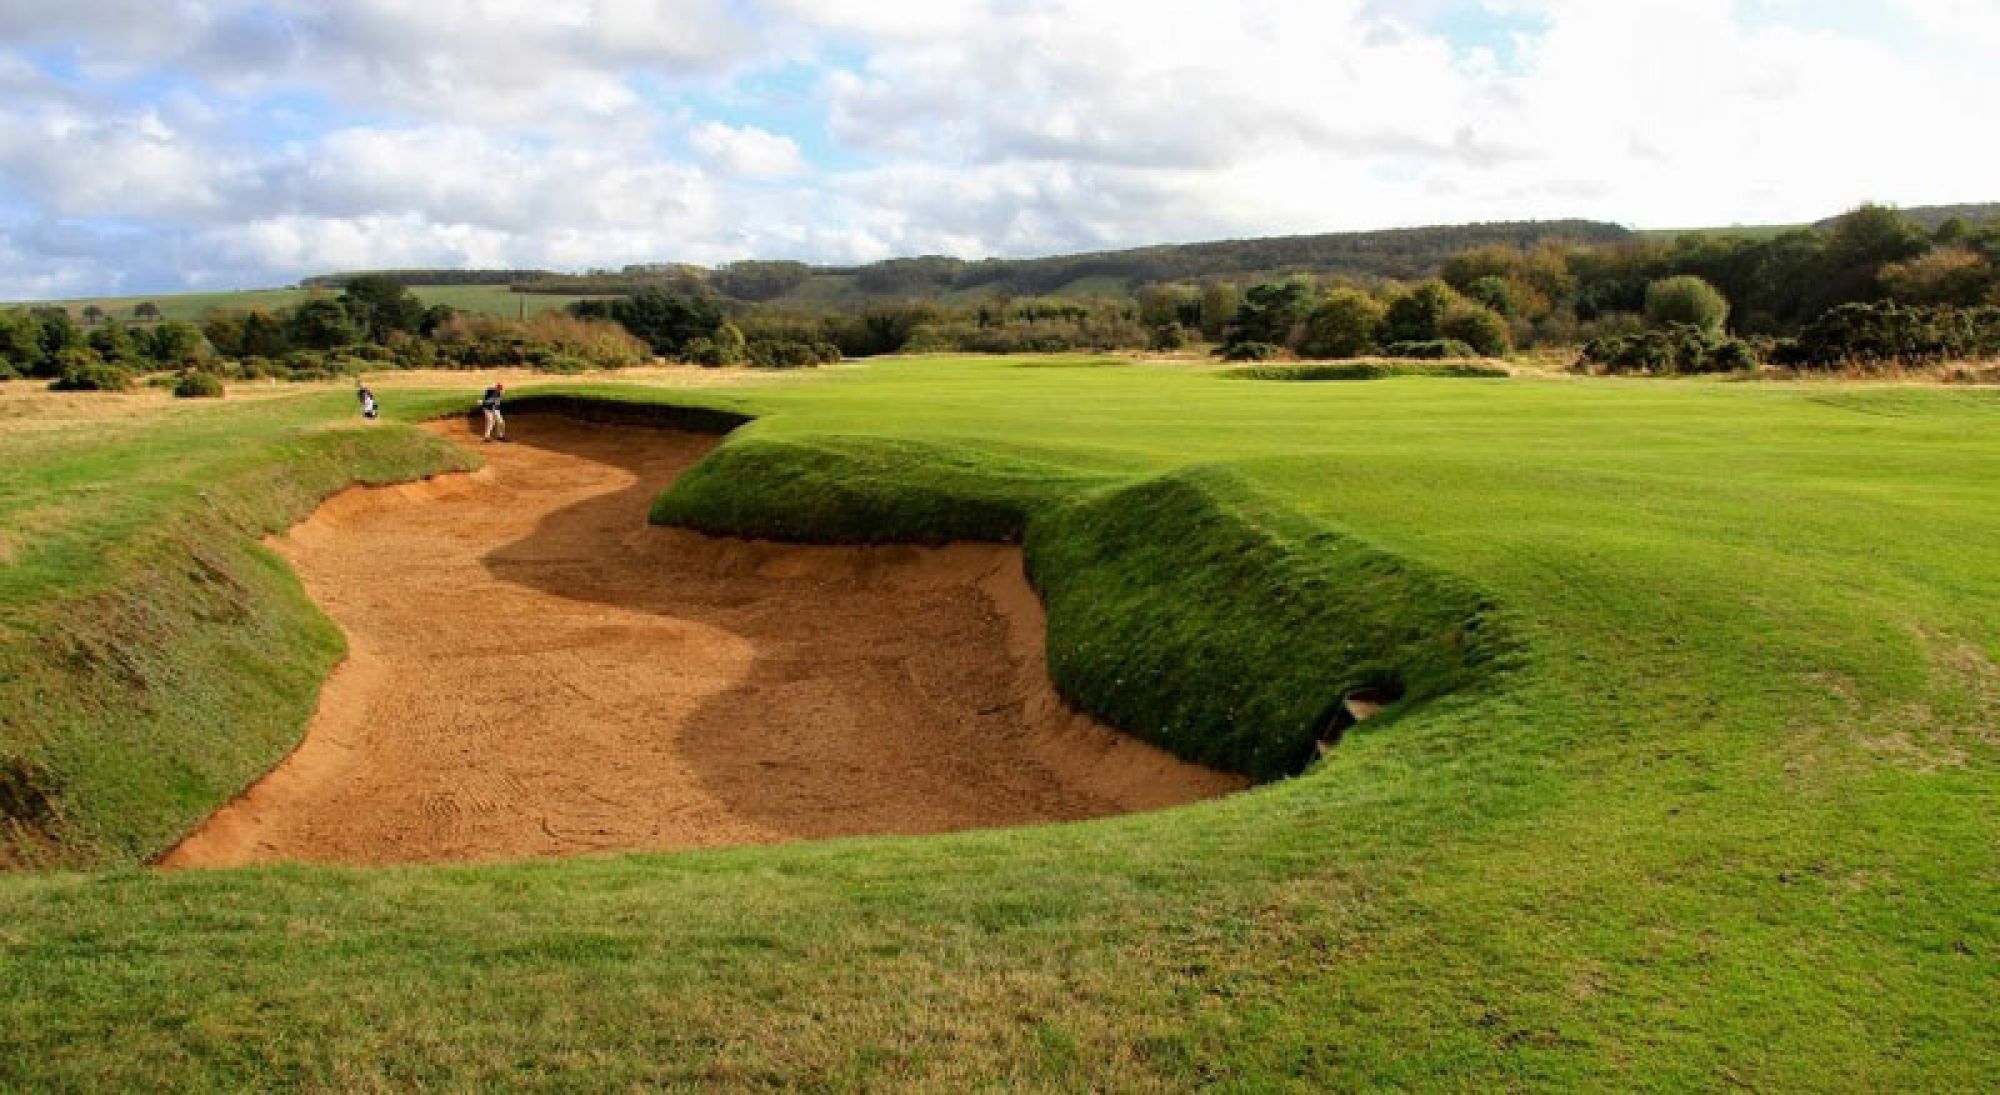 All The Ganton Golf Club's impressive golf course situated in breathtaking Yorkshire.